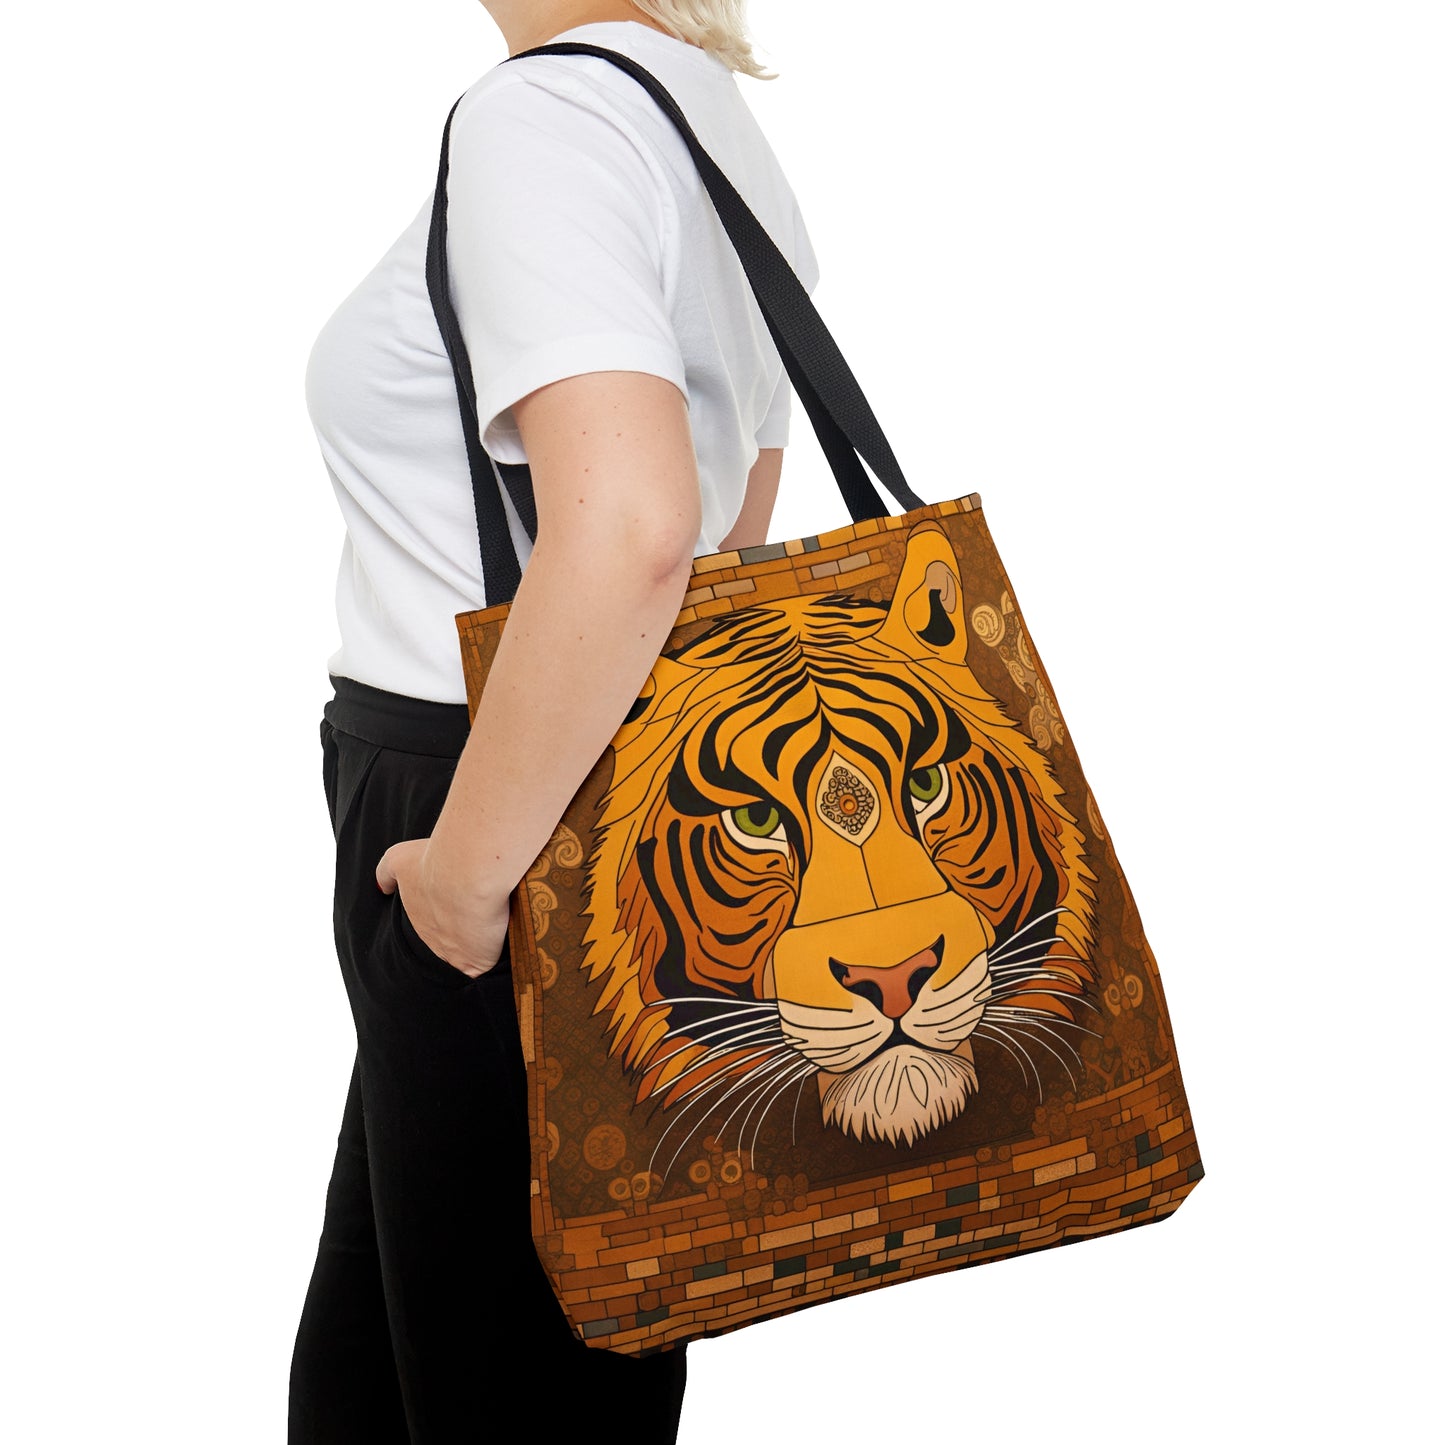 Tiger Head in the Style of Gustav Klimt Printed on Tote Bag large with female model